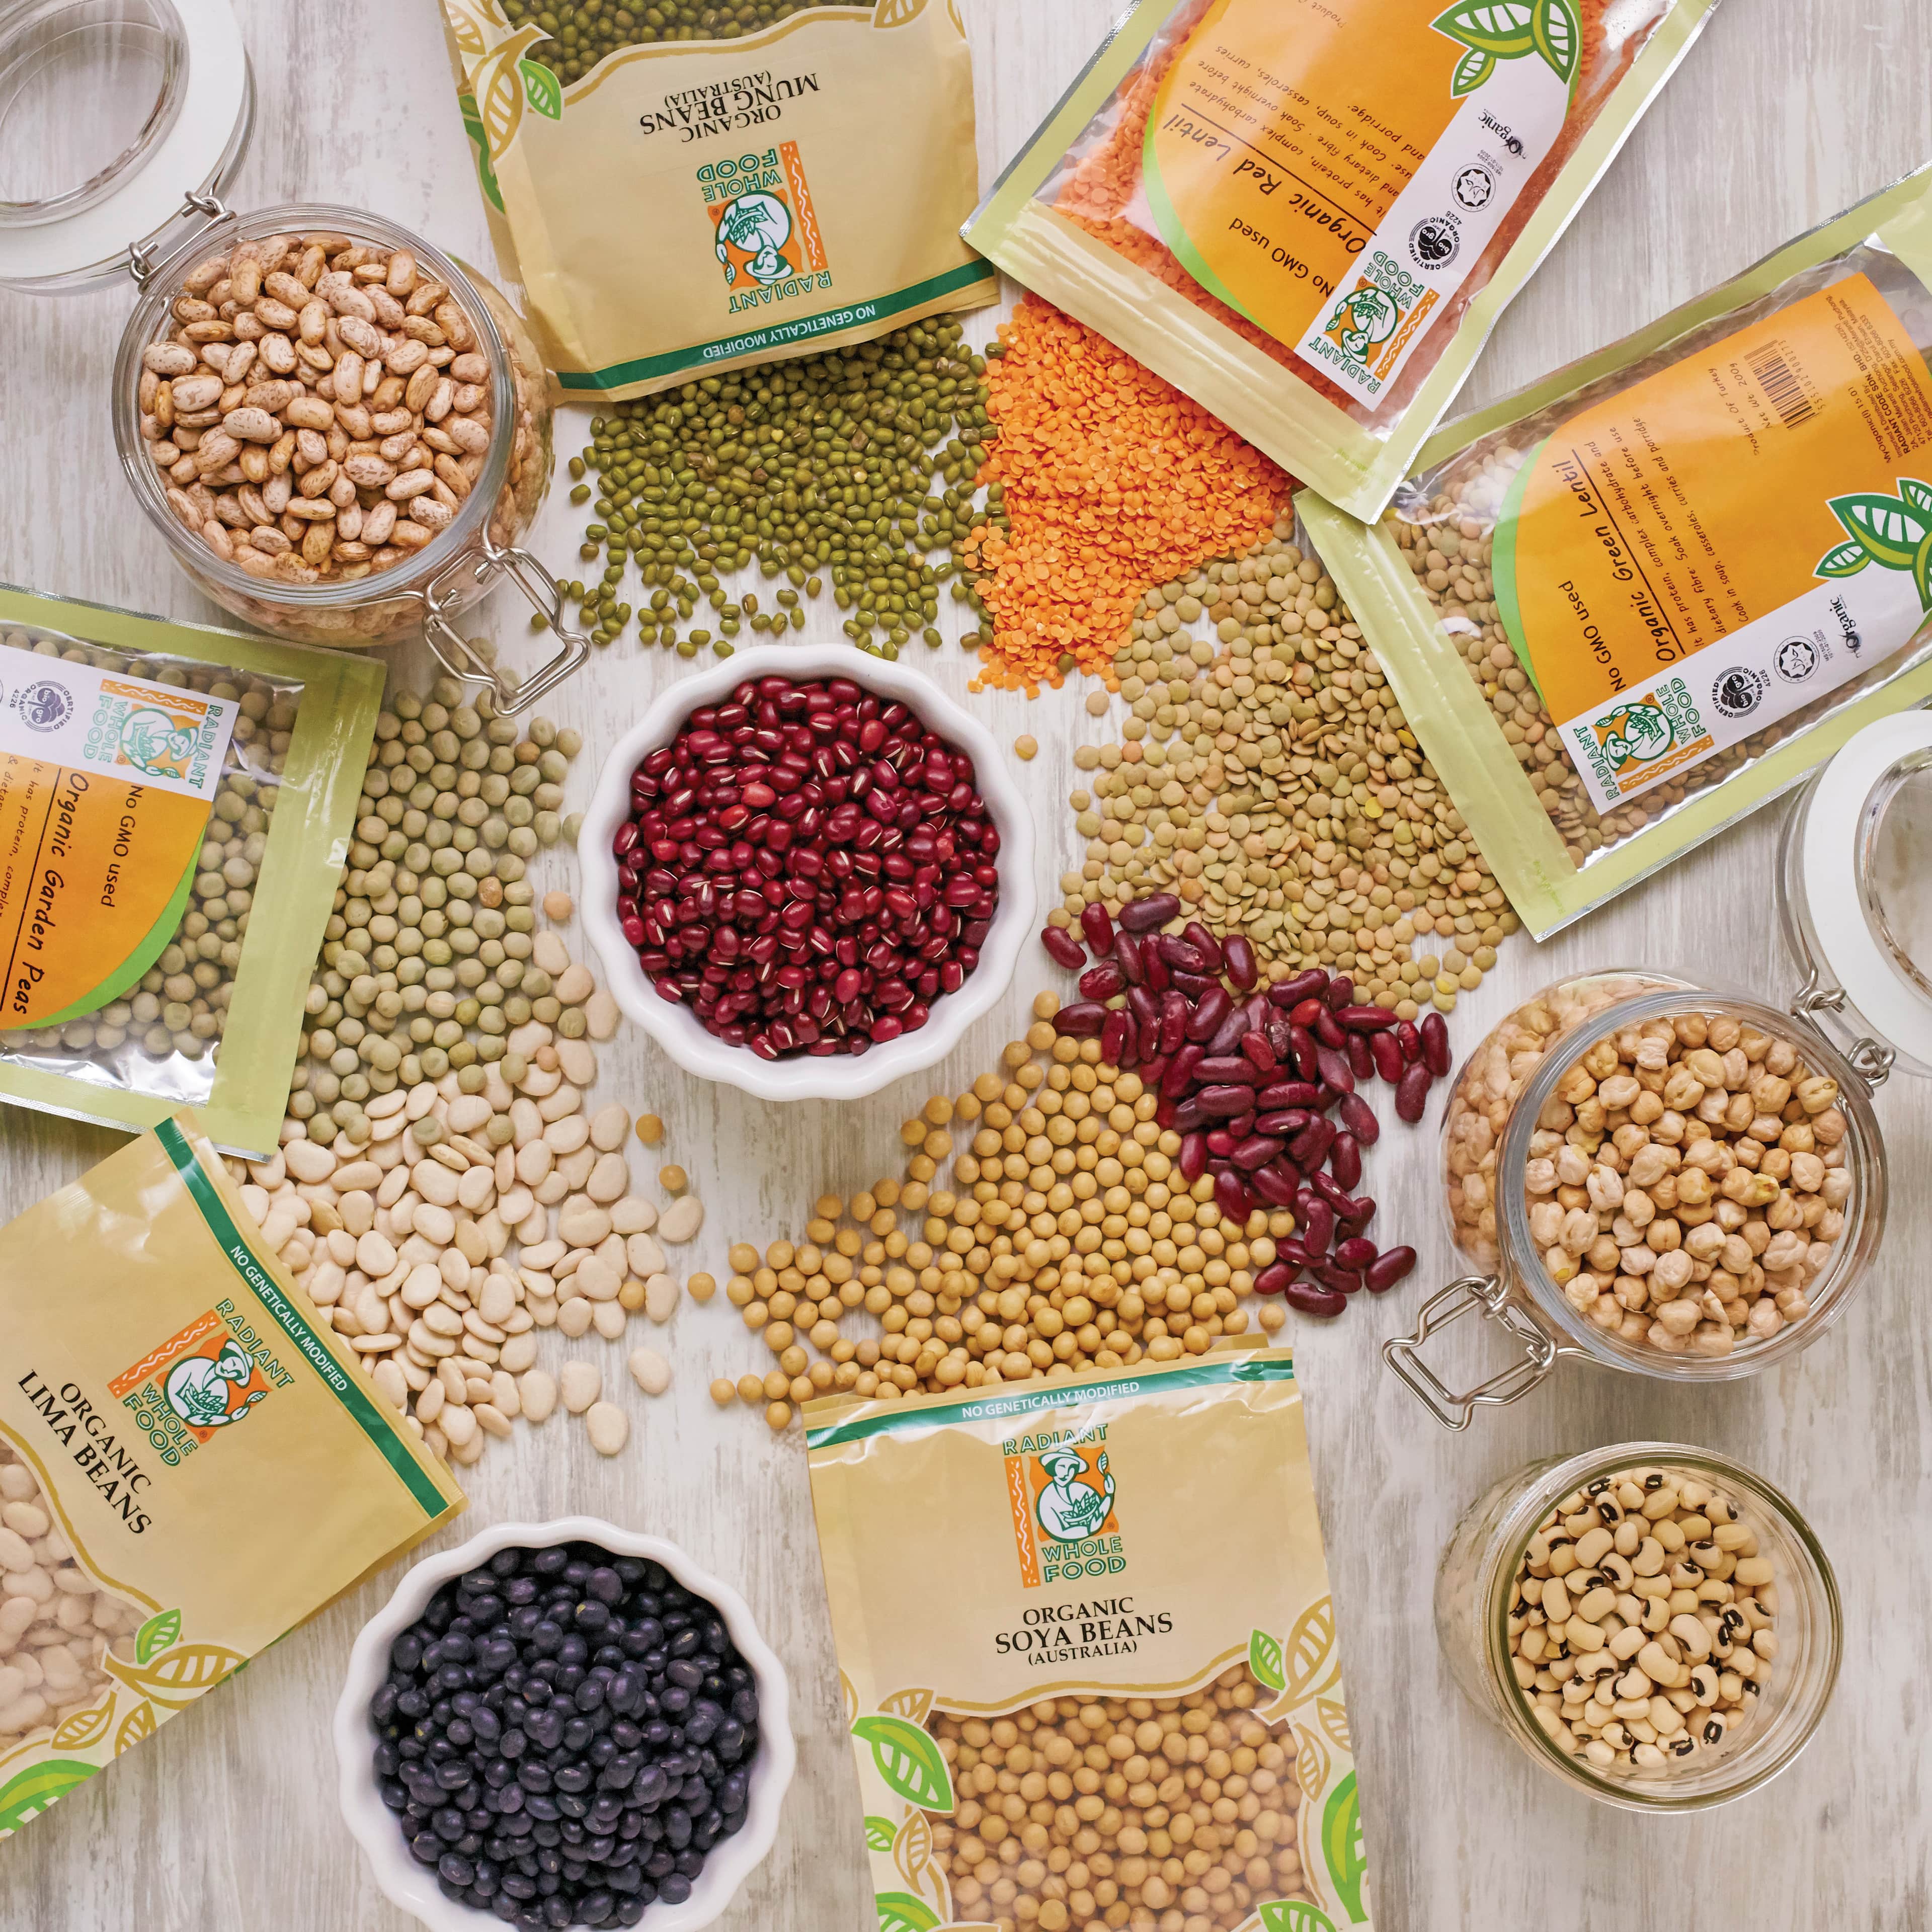 Benefits of Pulses